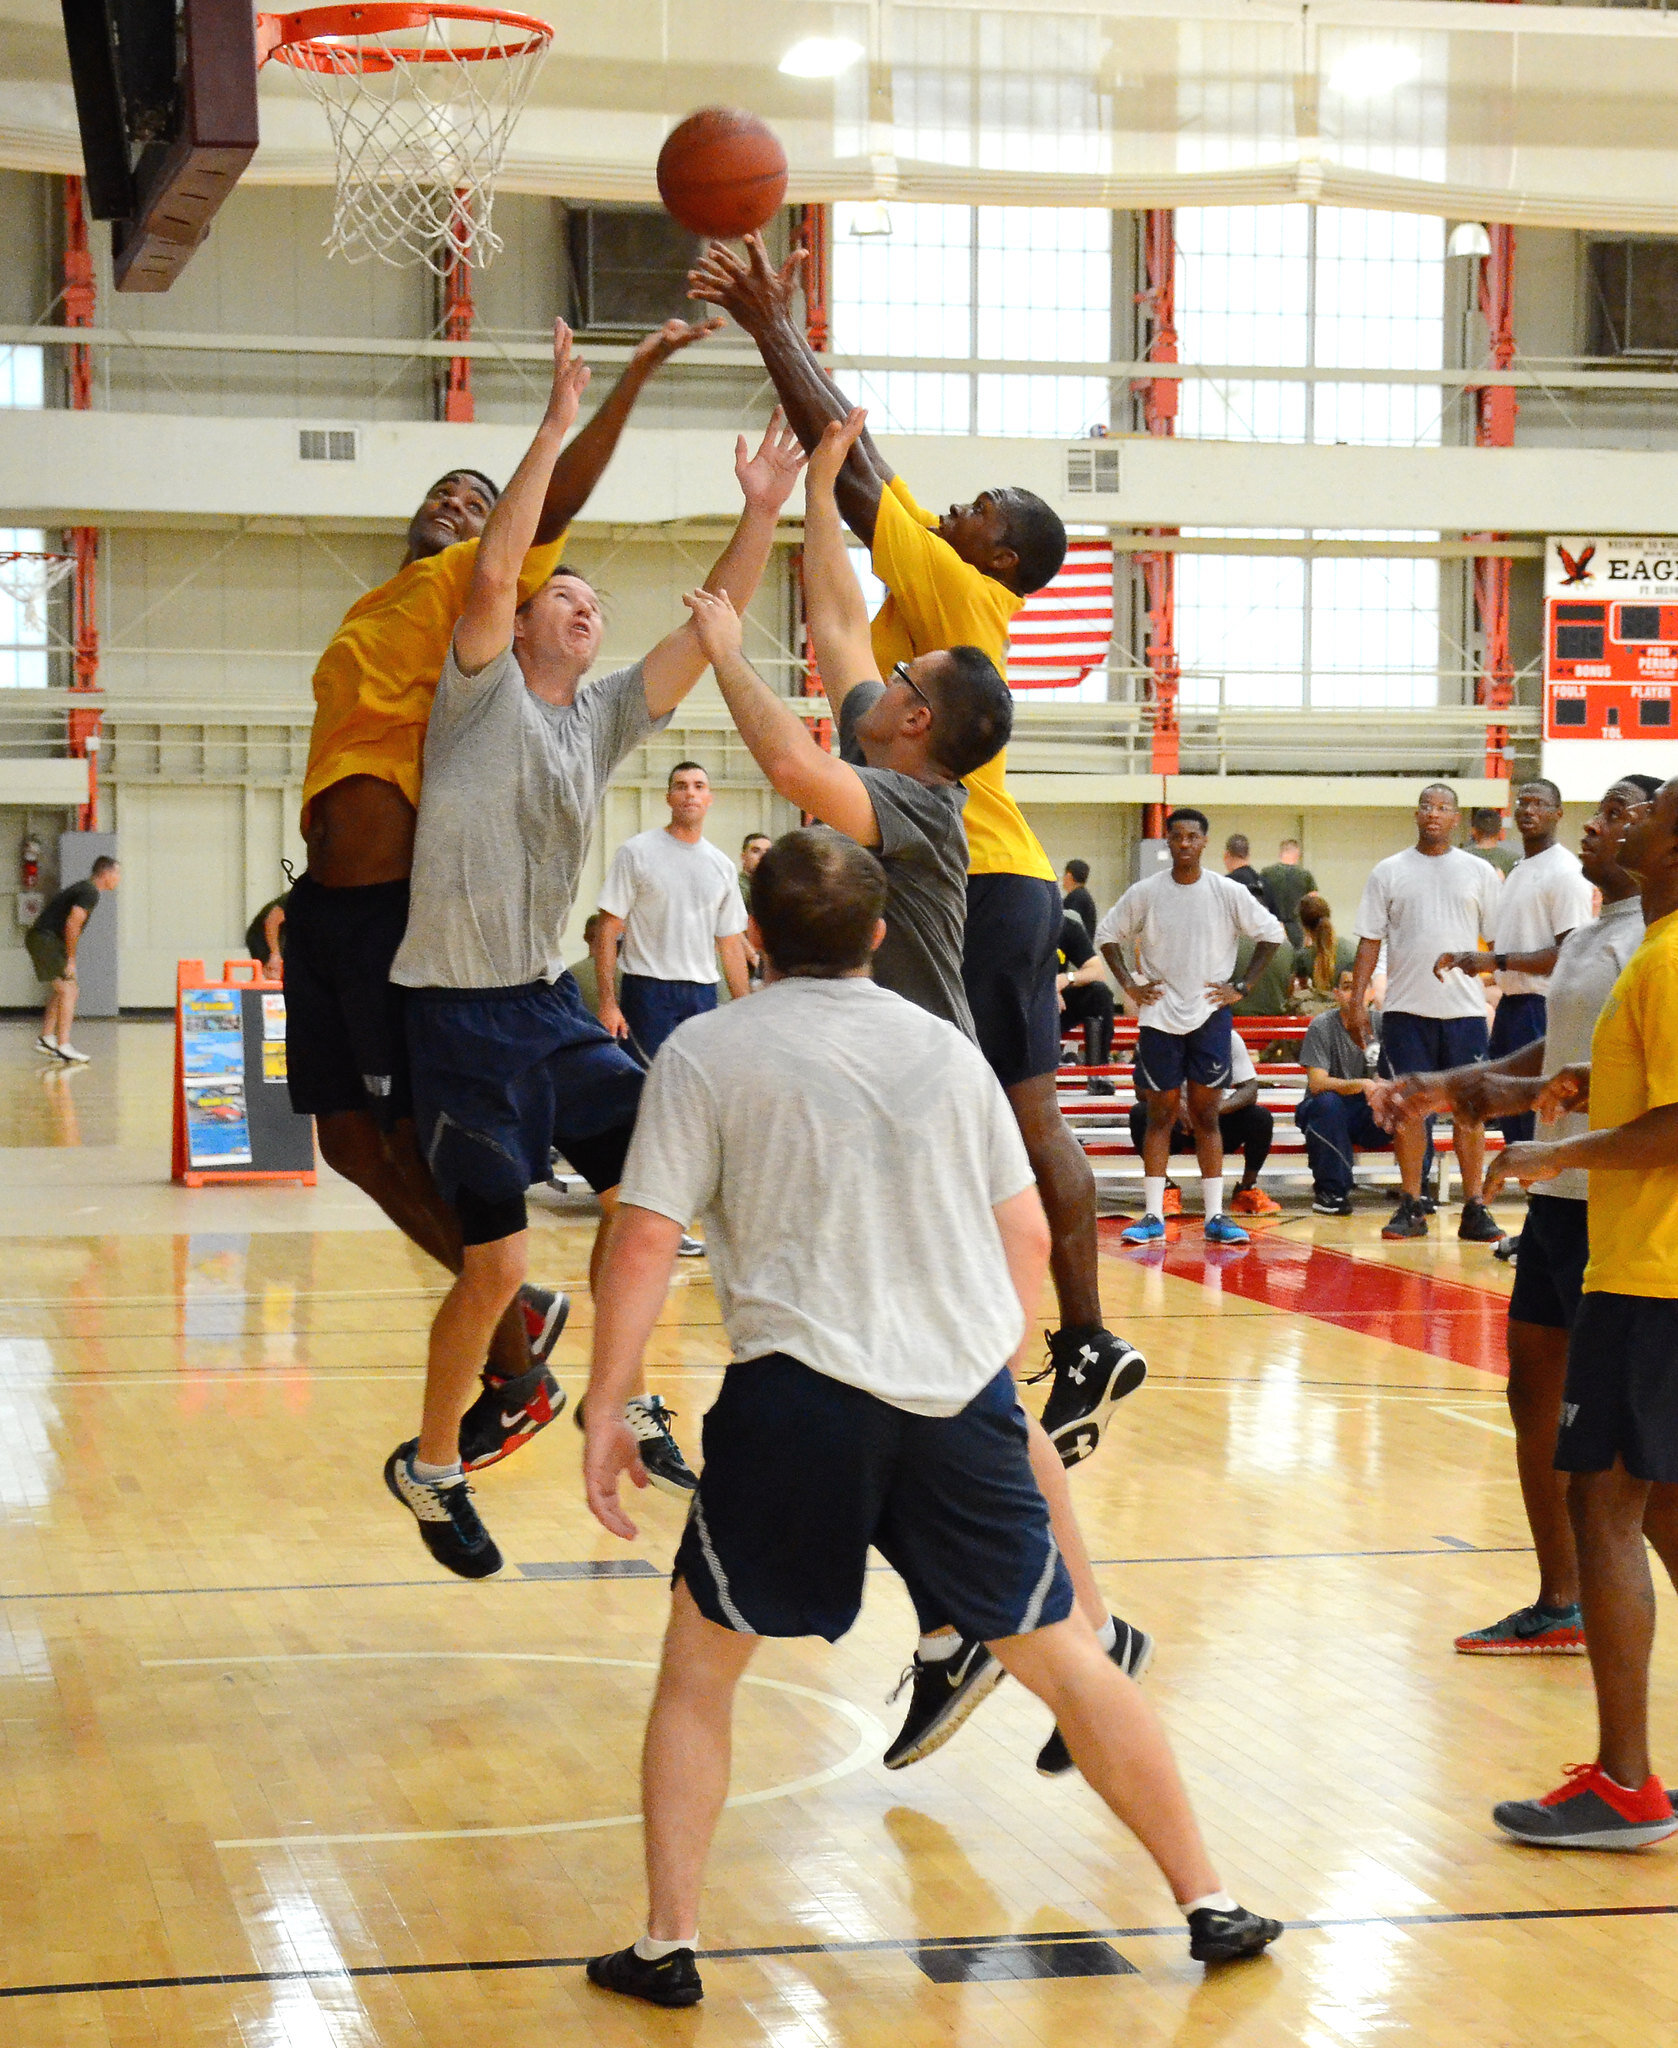 Basketball - Sports Day at Fort Belvoir